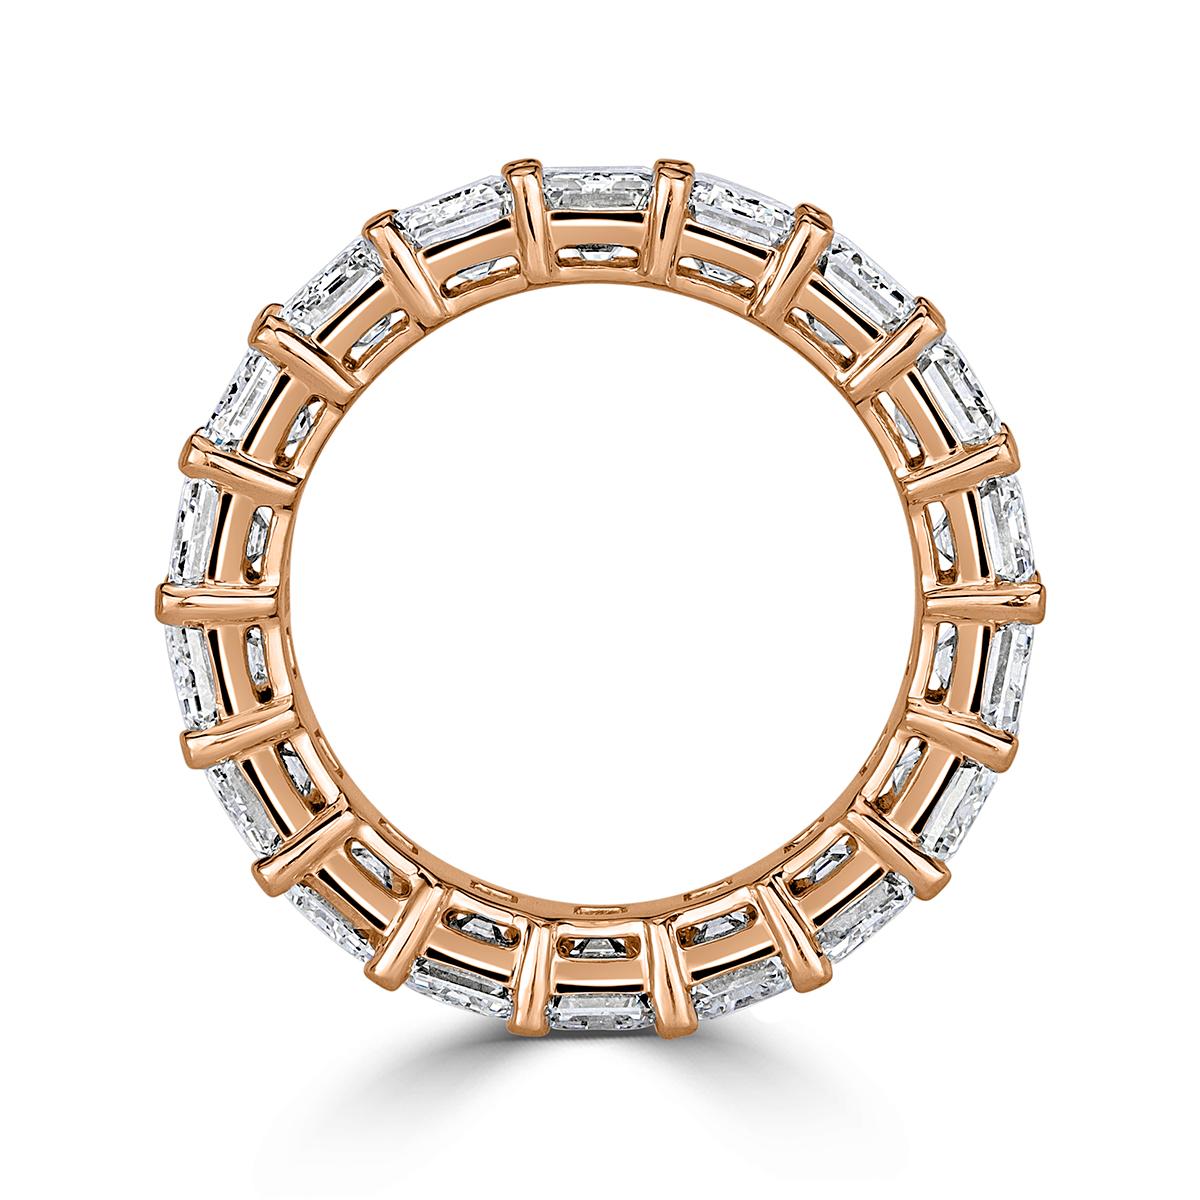 Created in 18k rose gold, this truly elegant yet timeless diamond eternity band showcases 9.09ct of perfectly matched emerald cut diamonds graded at E-F in color, VVS1-VVS2 in clarity. They are set in a classic four-prong basket setting style. All